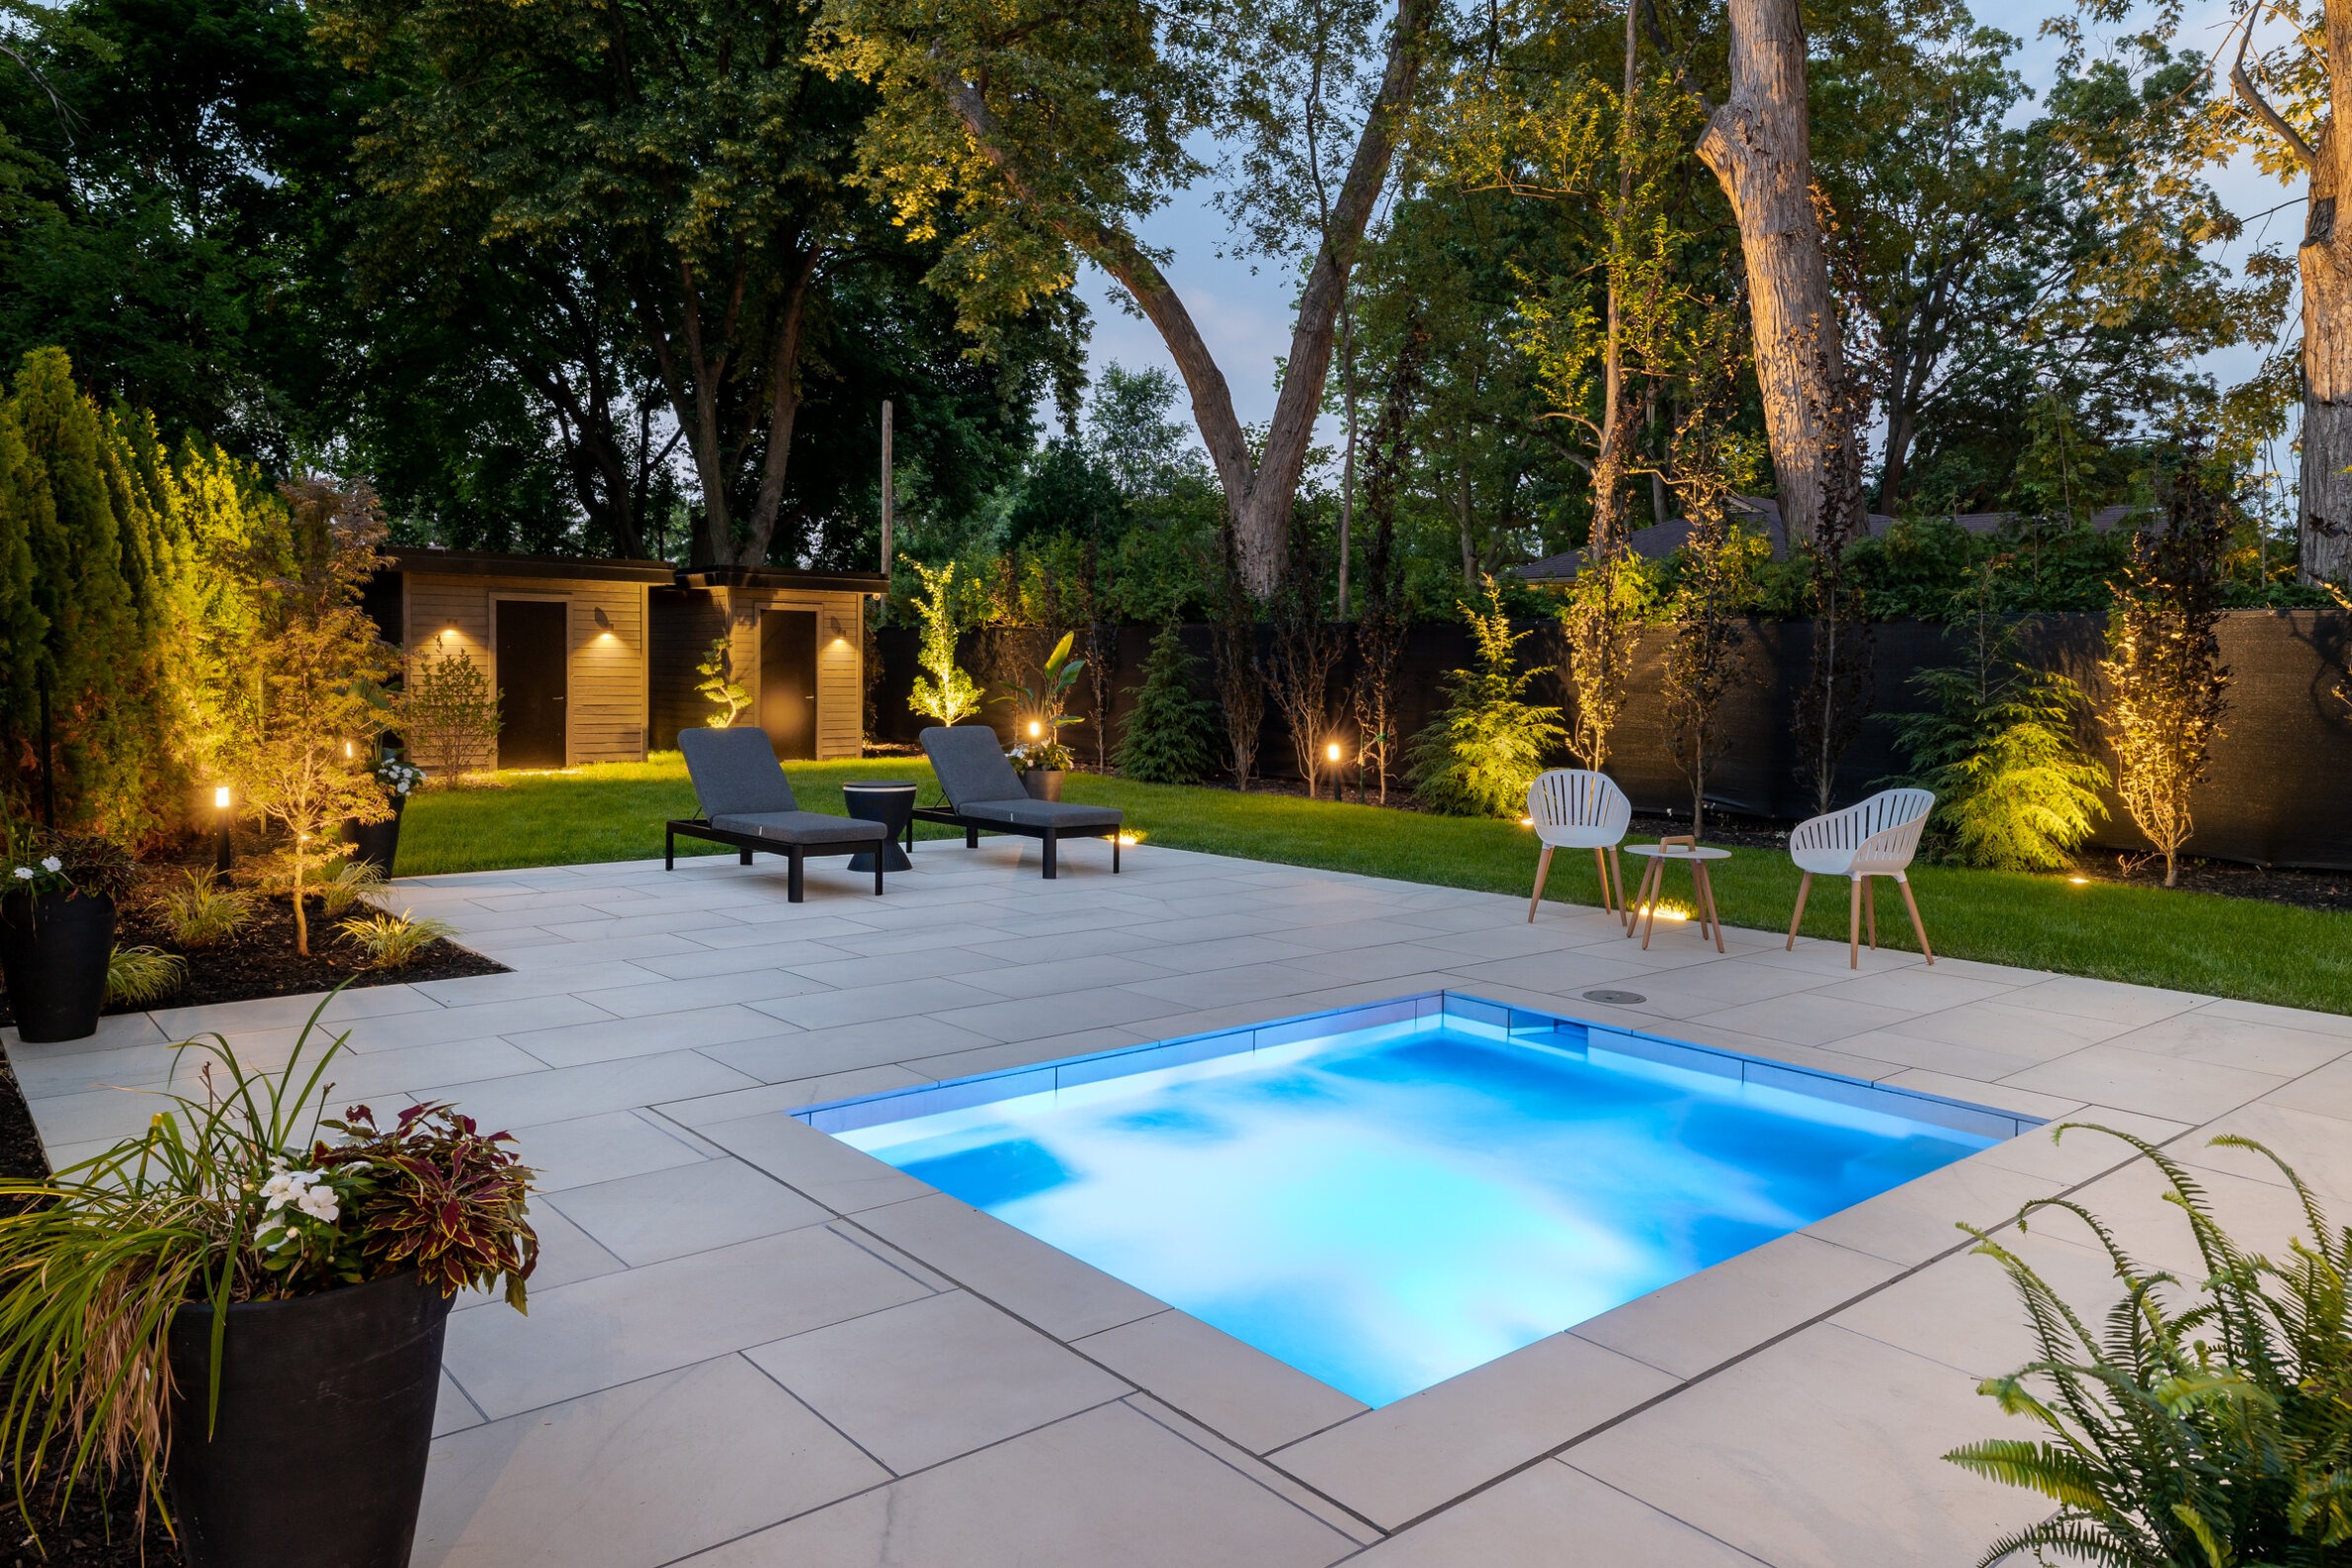 A luxurious backyard at dusk featuring a small illuminated pool, lounge chairs, elegant landscaping, lighting, and a modern shed surrounded by trees.